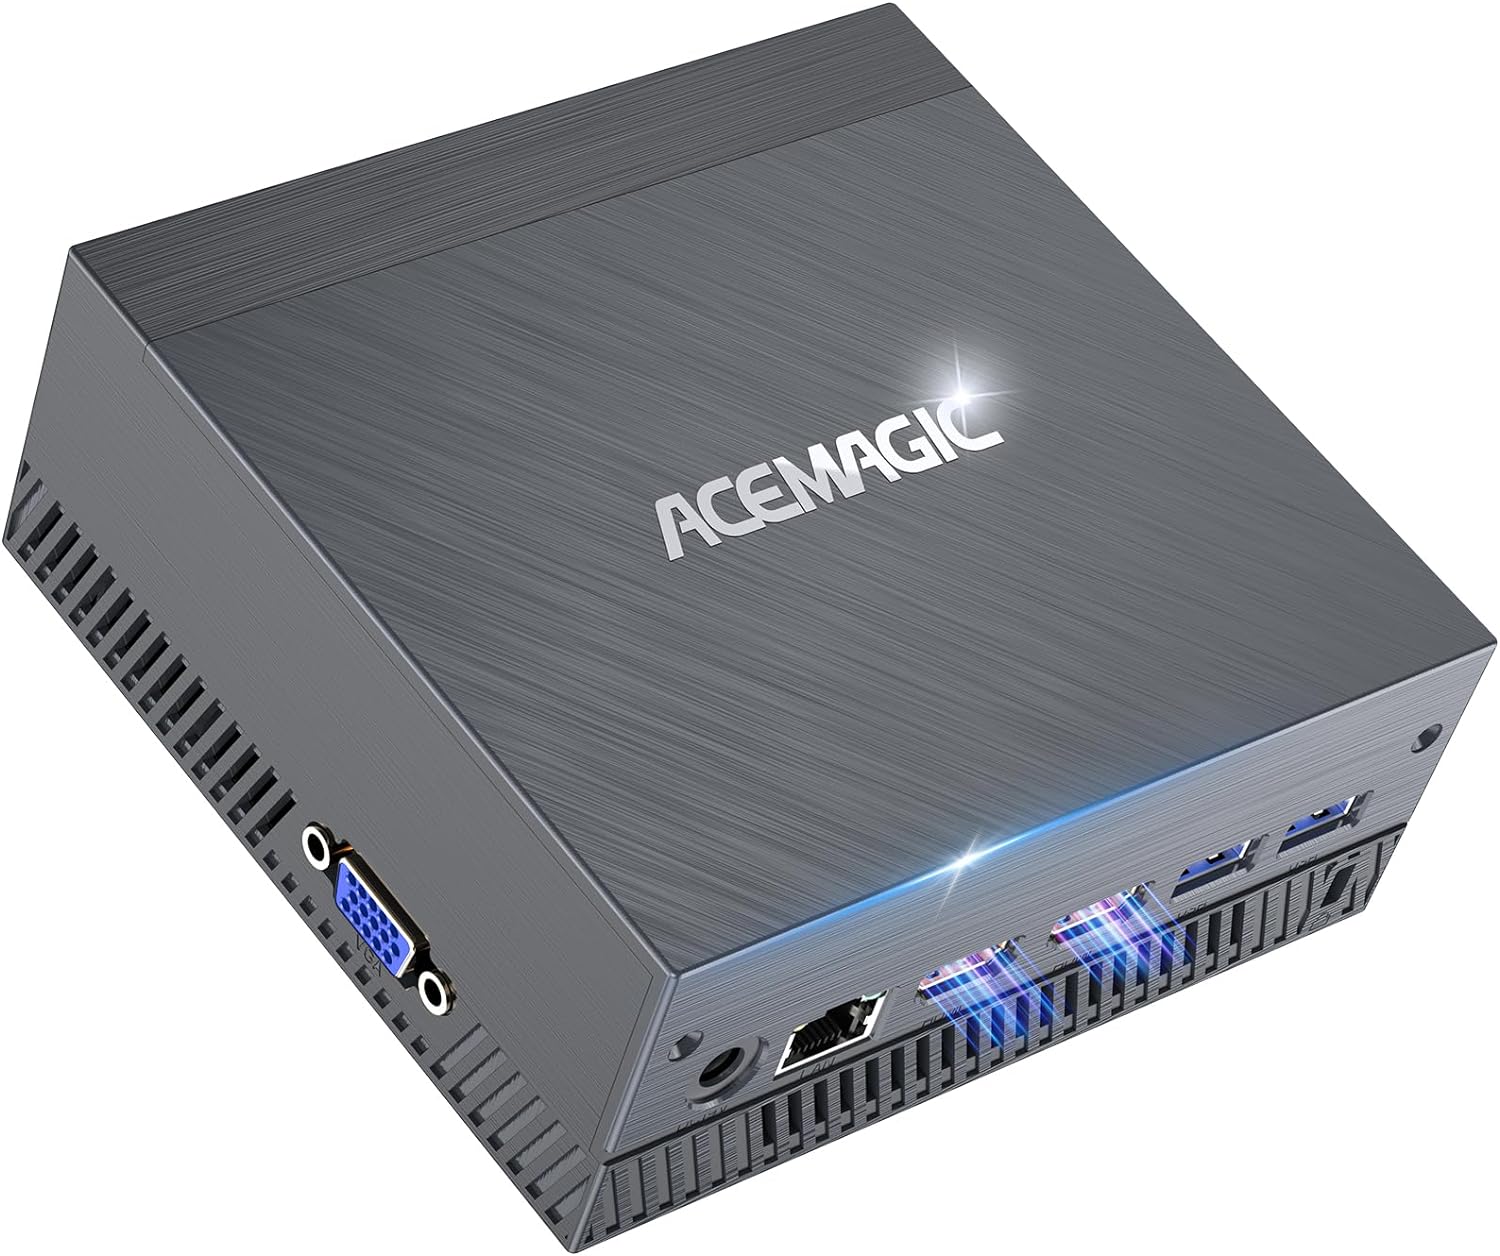 ACEMAGIC Mini PC i7-11800H(8C/16T, up to 4.6 GHz) Mini Computers, 16GB DDR4 512G NvMe SSD, Mini Desktop Computer Small PC Support 4K UHD Triple Display/WiFi 6/BT5.2 for Business/HTPC